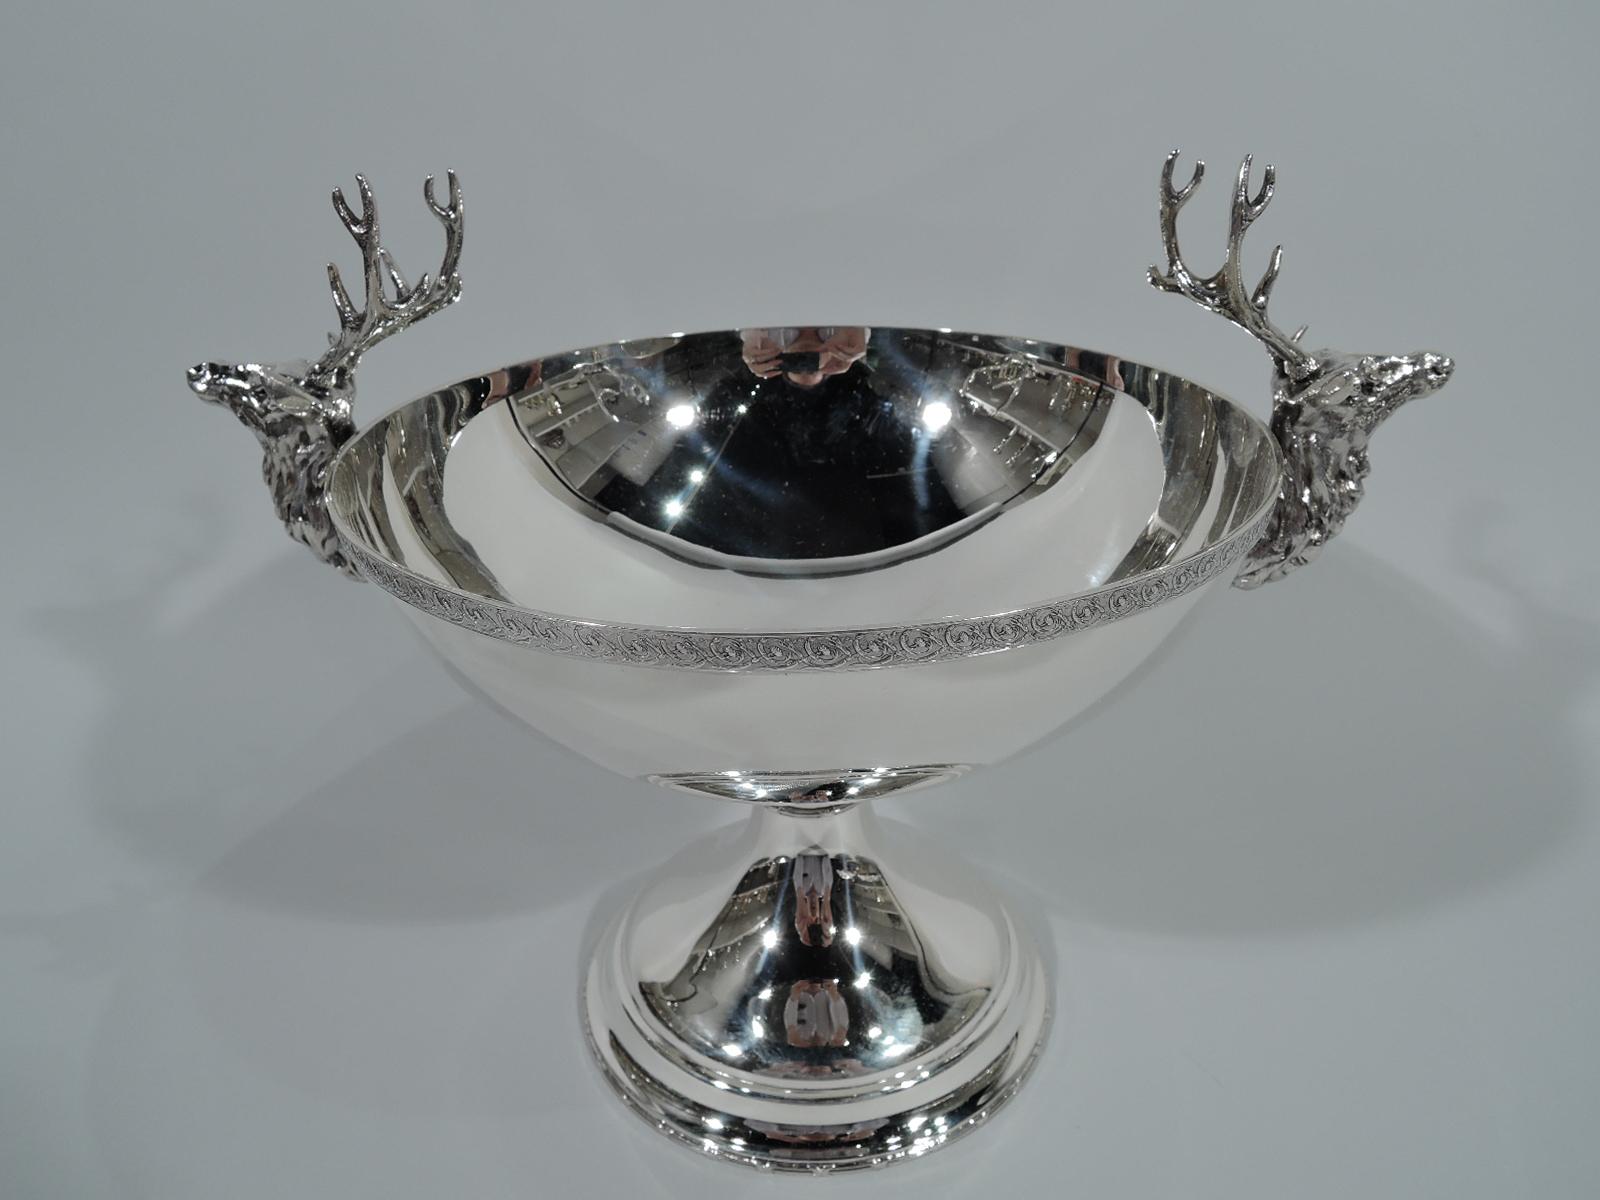 Early sterling silver compote with hunt theme. Made by Tiffany & Co. in New York. Curved bowl and domed foot. Bowl has floral rinceaux rim. Foot has reeded rim. Cast side handles in form of deer’s heads – majestic bucks with rugged coats and massive